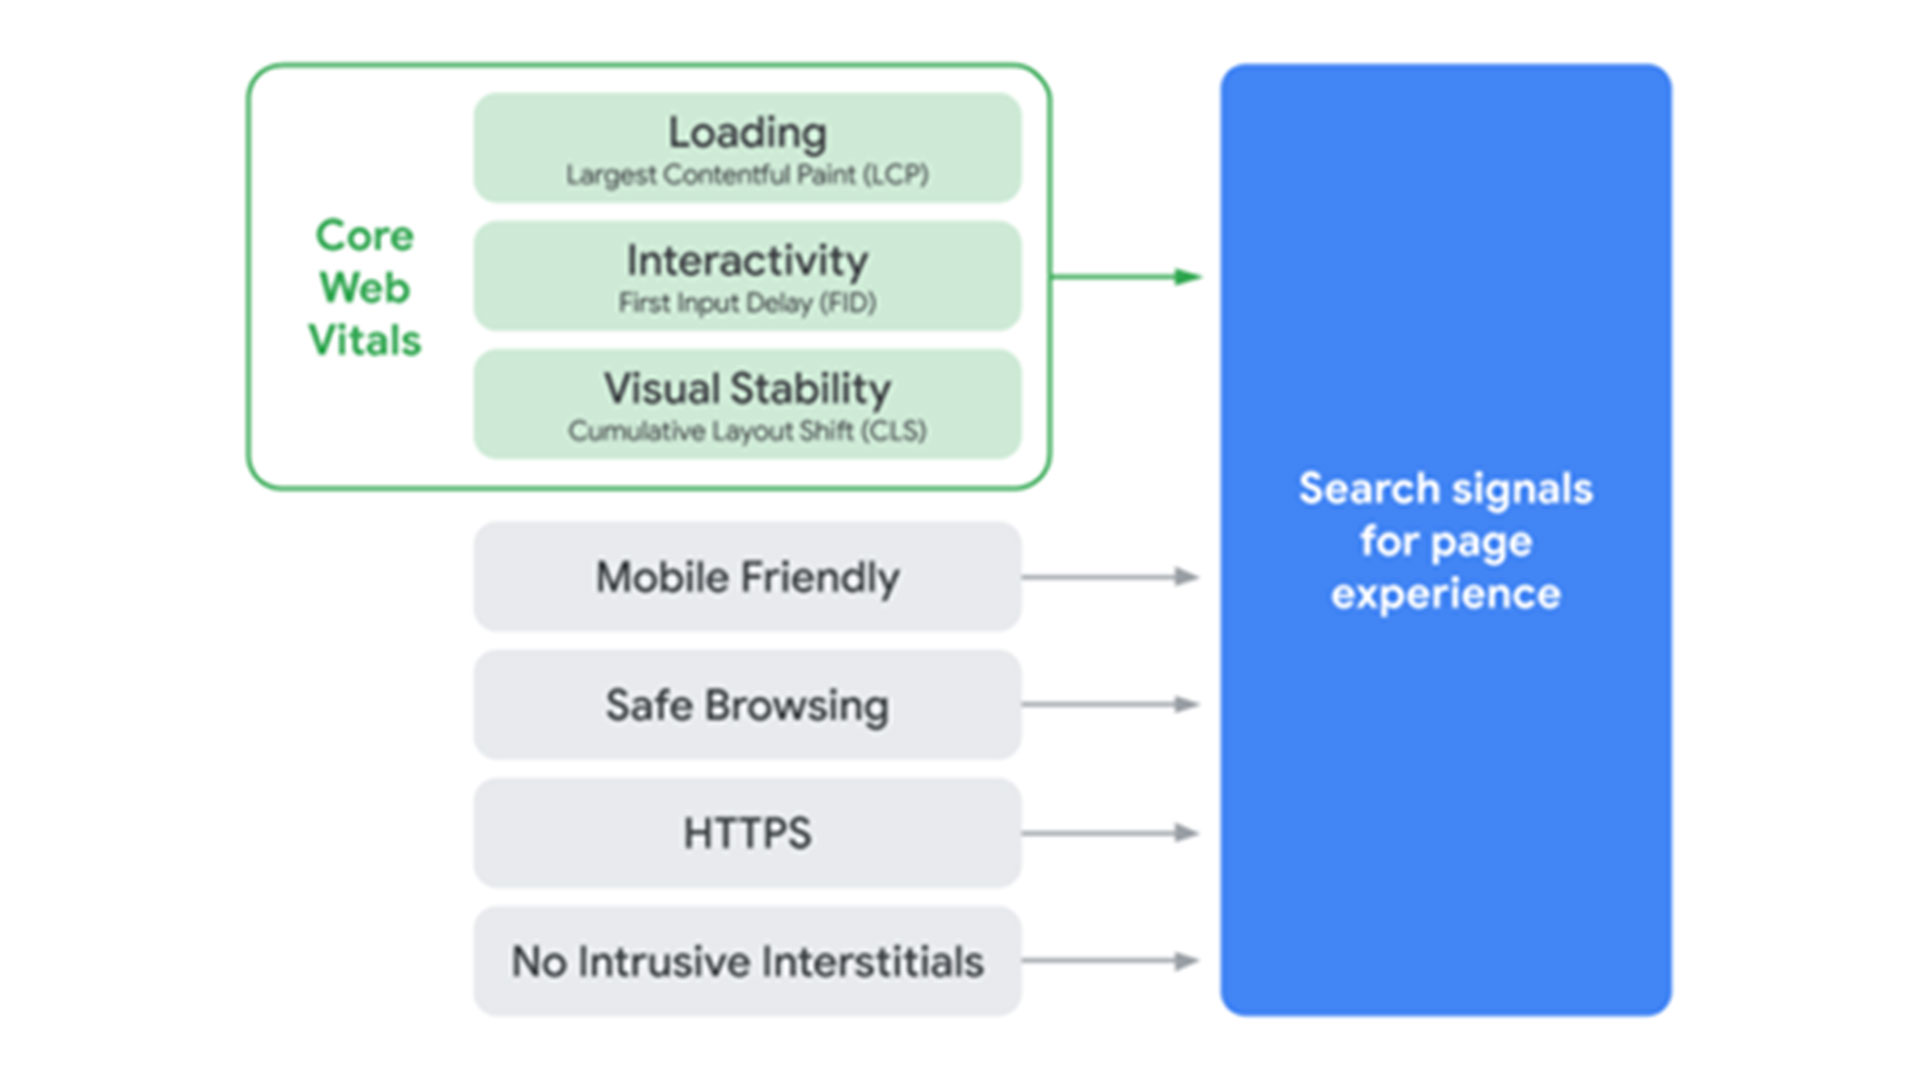 The seven search signals for page experience